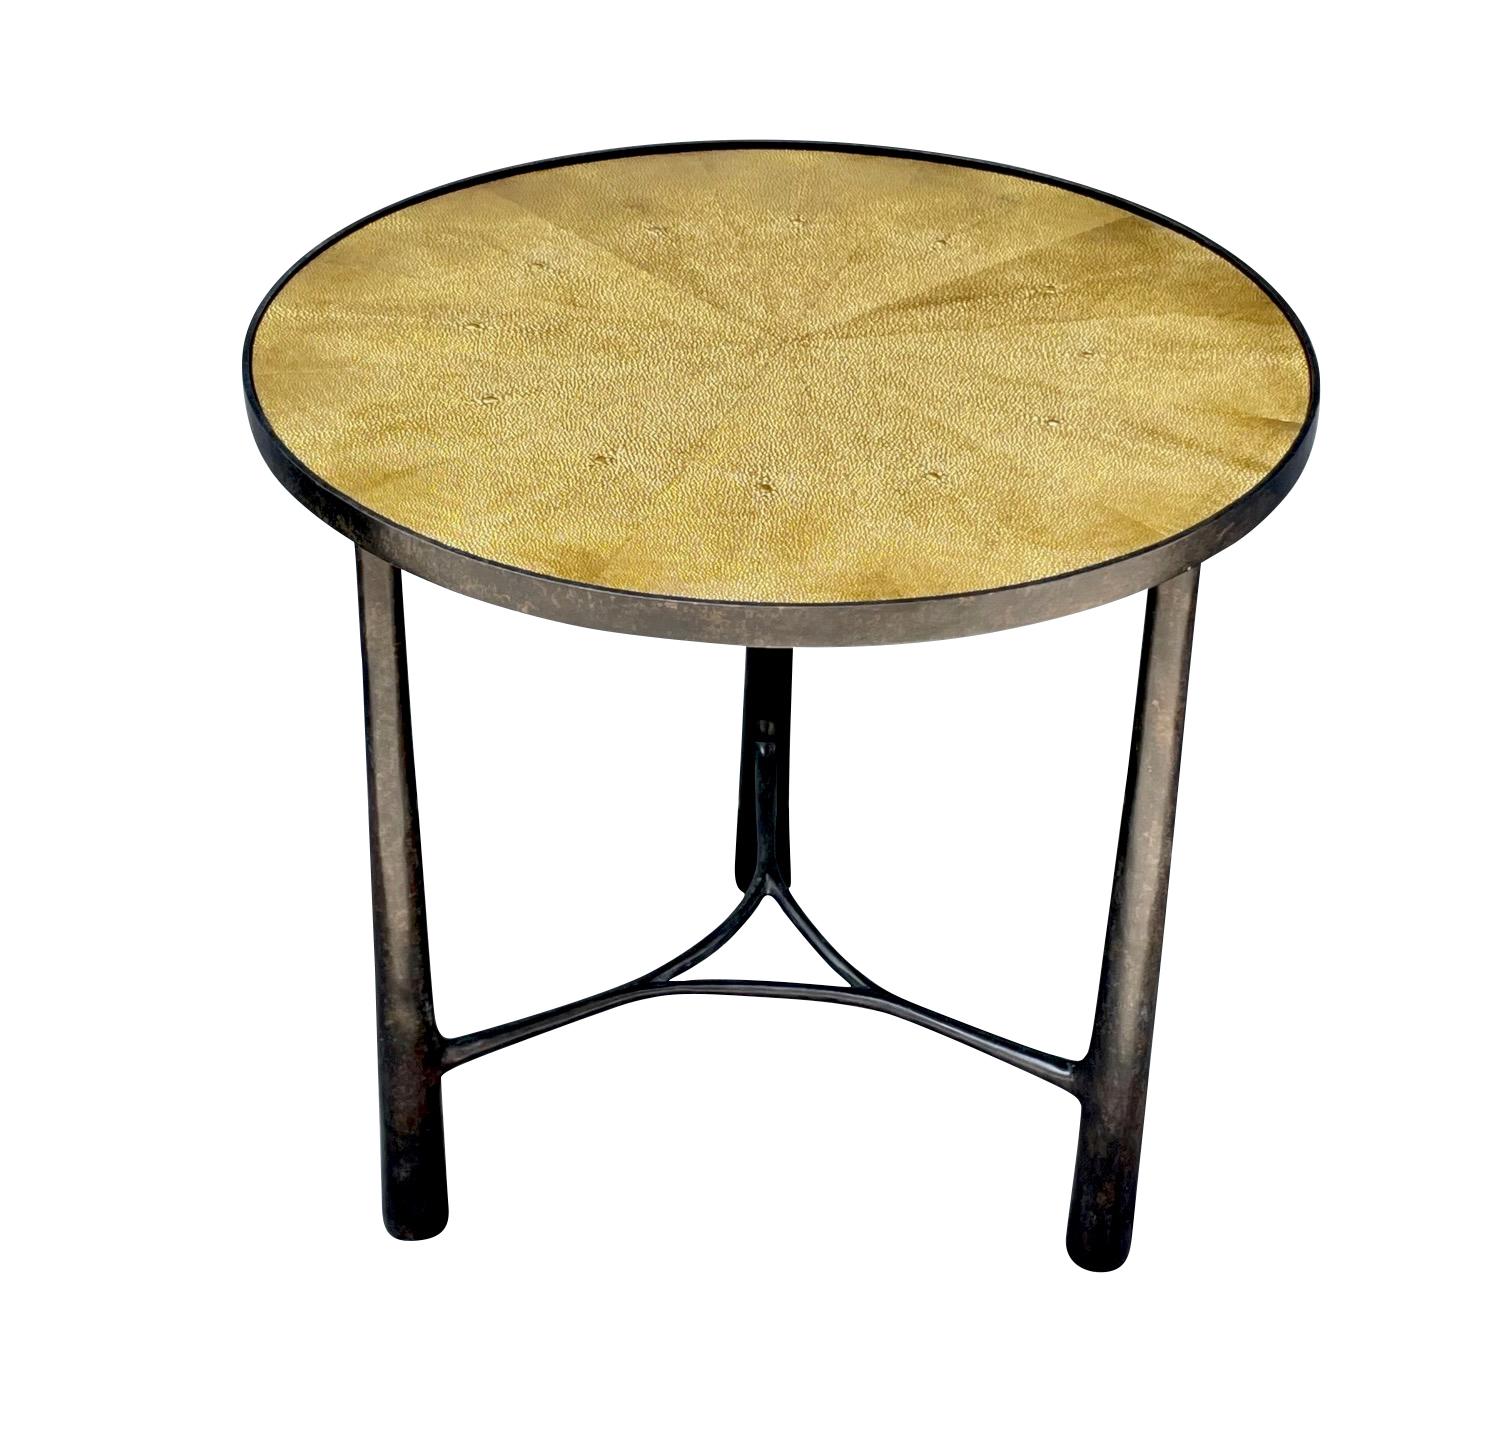 Contemporary German bronze coffee table with a gold faux shagreen top.
Three tubular legs.